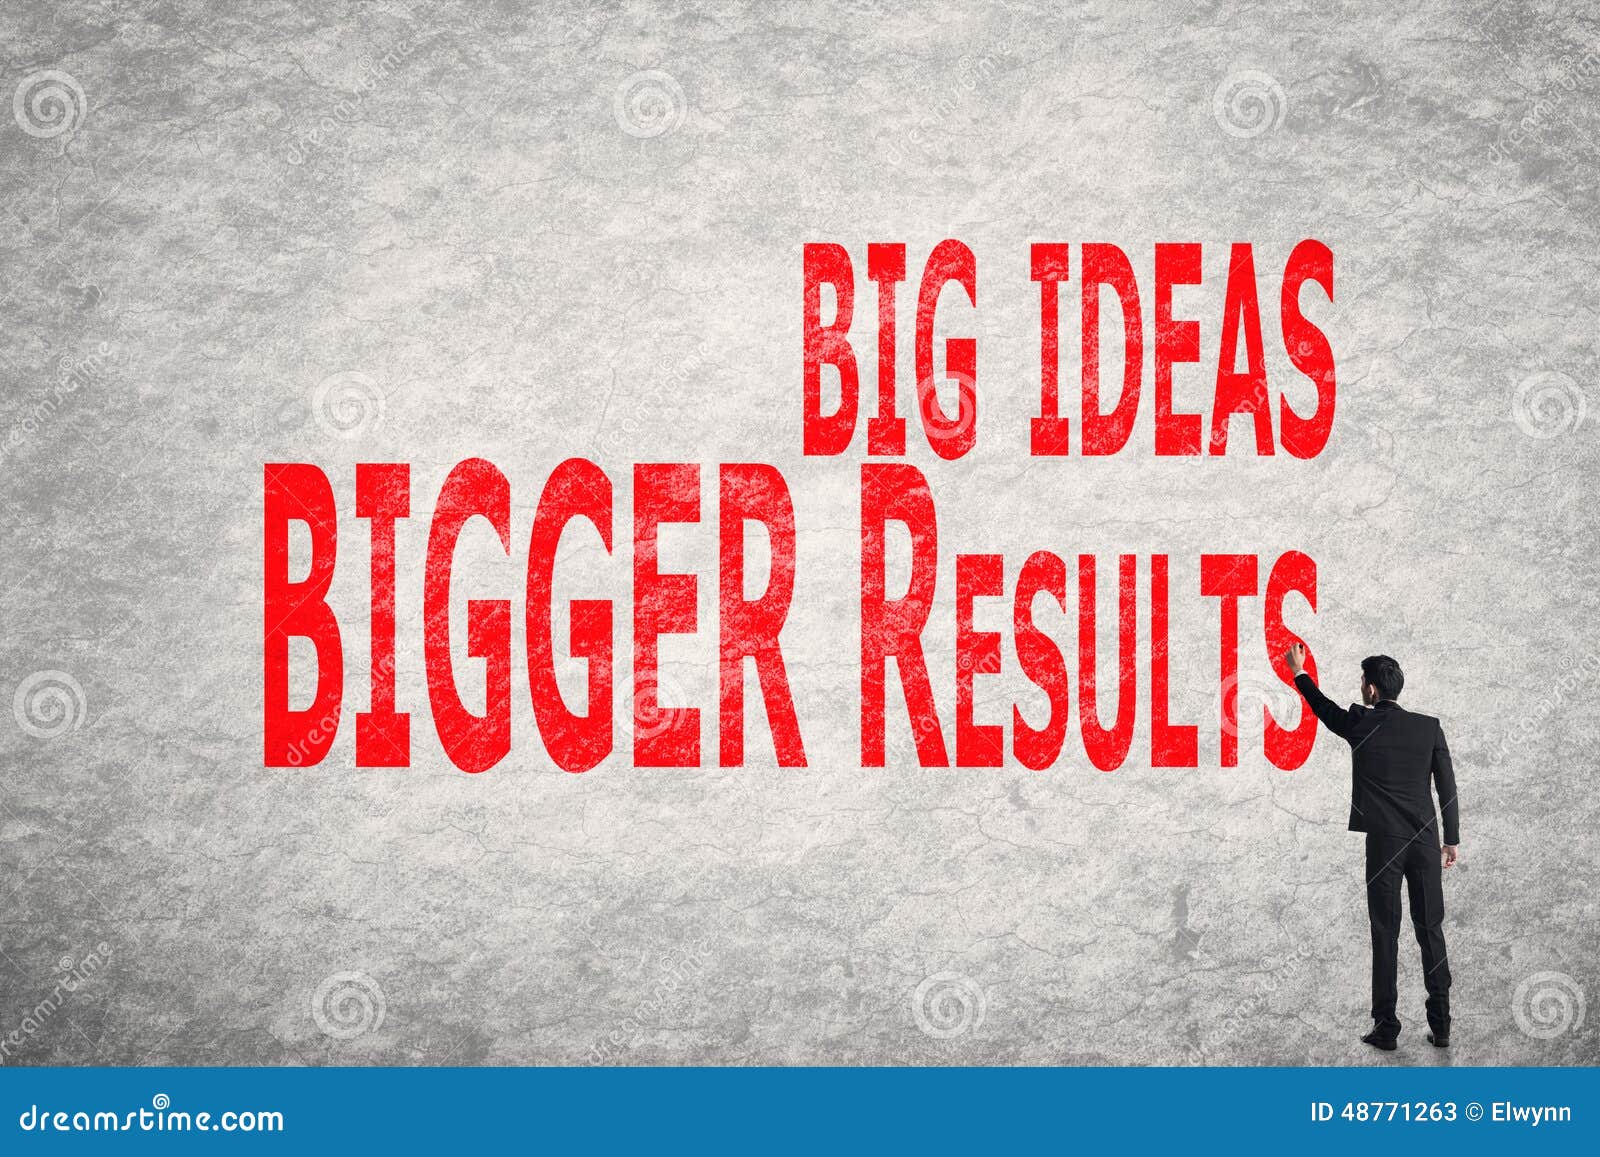 write words on wall, big ideas bigger results